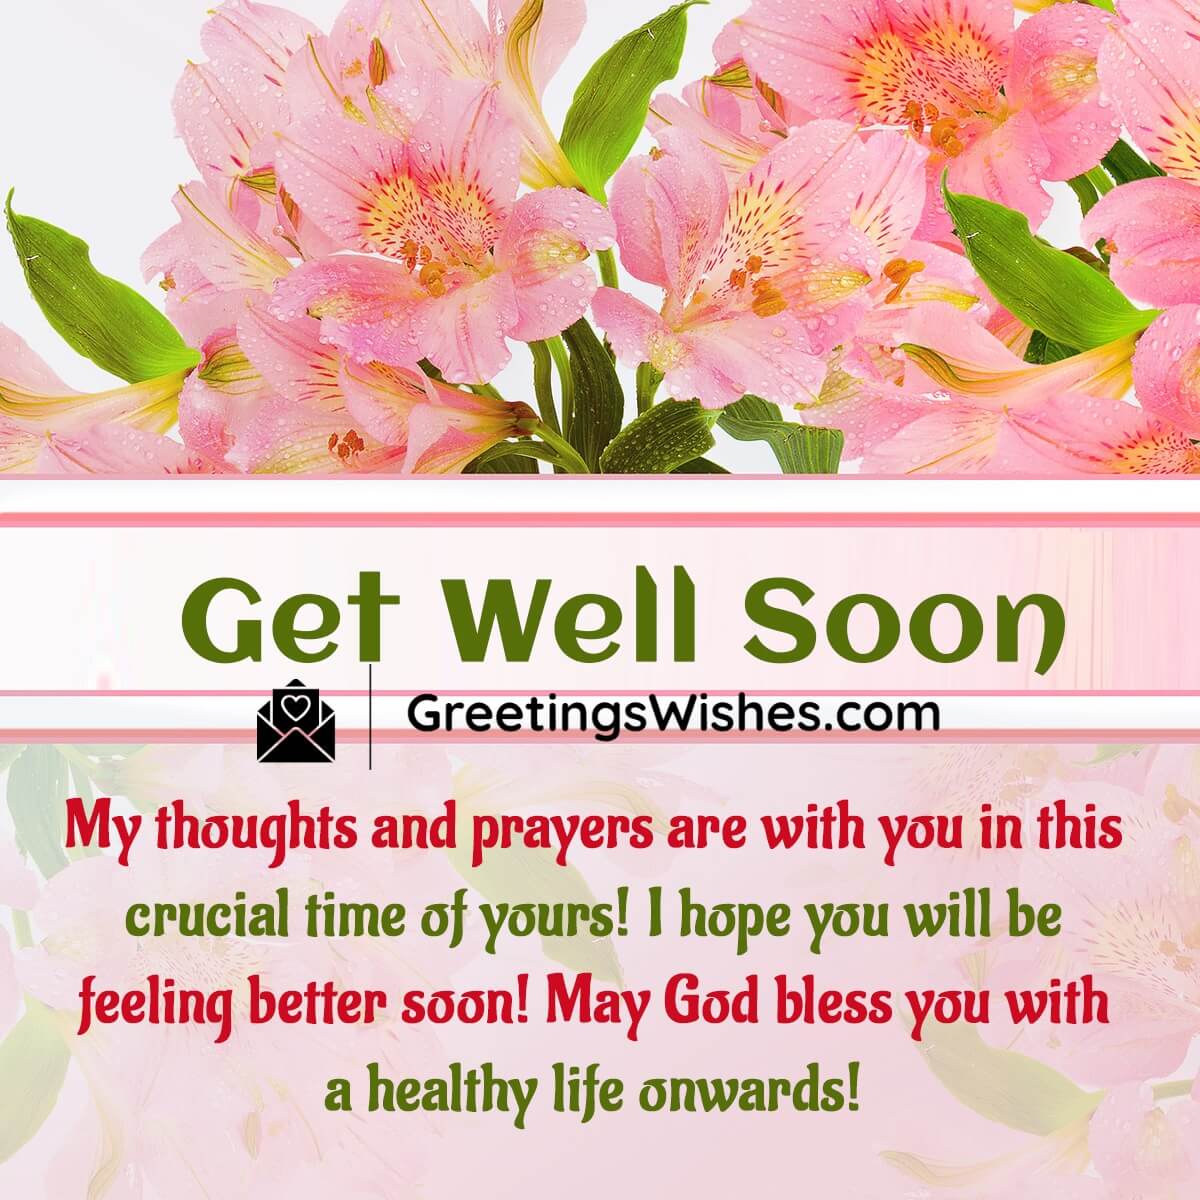 Get Well Soon Messages,wishes